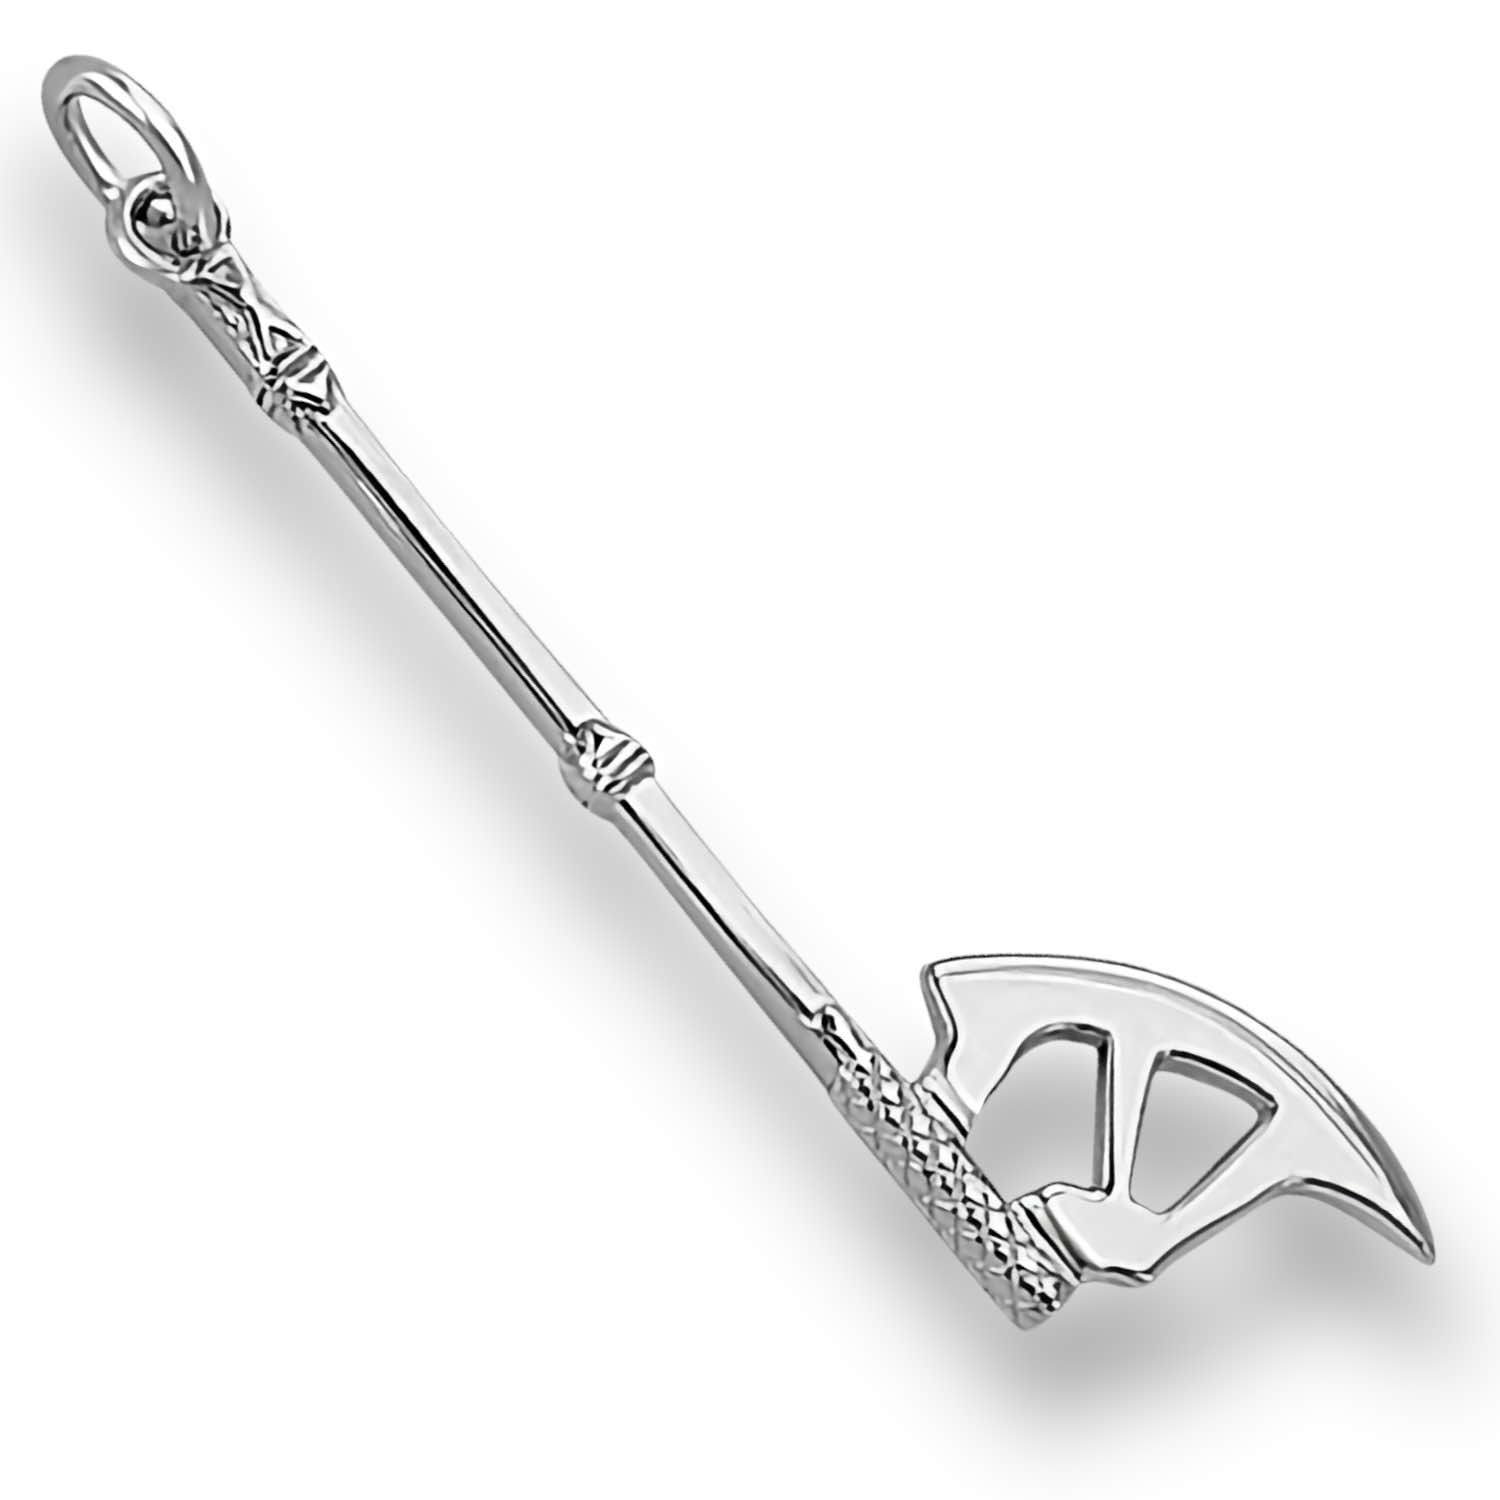 A powerful symbol of strength and courage, the Gloins Axe Pendant is a must-have for any Lord of the Rings fan.